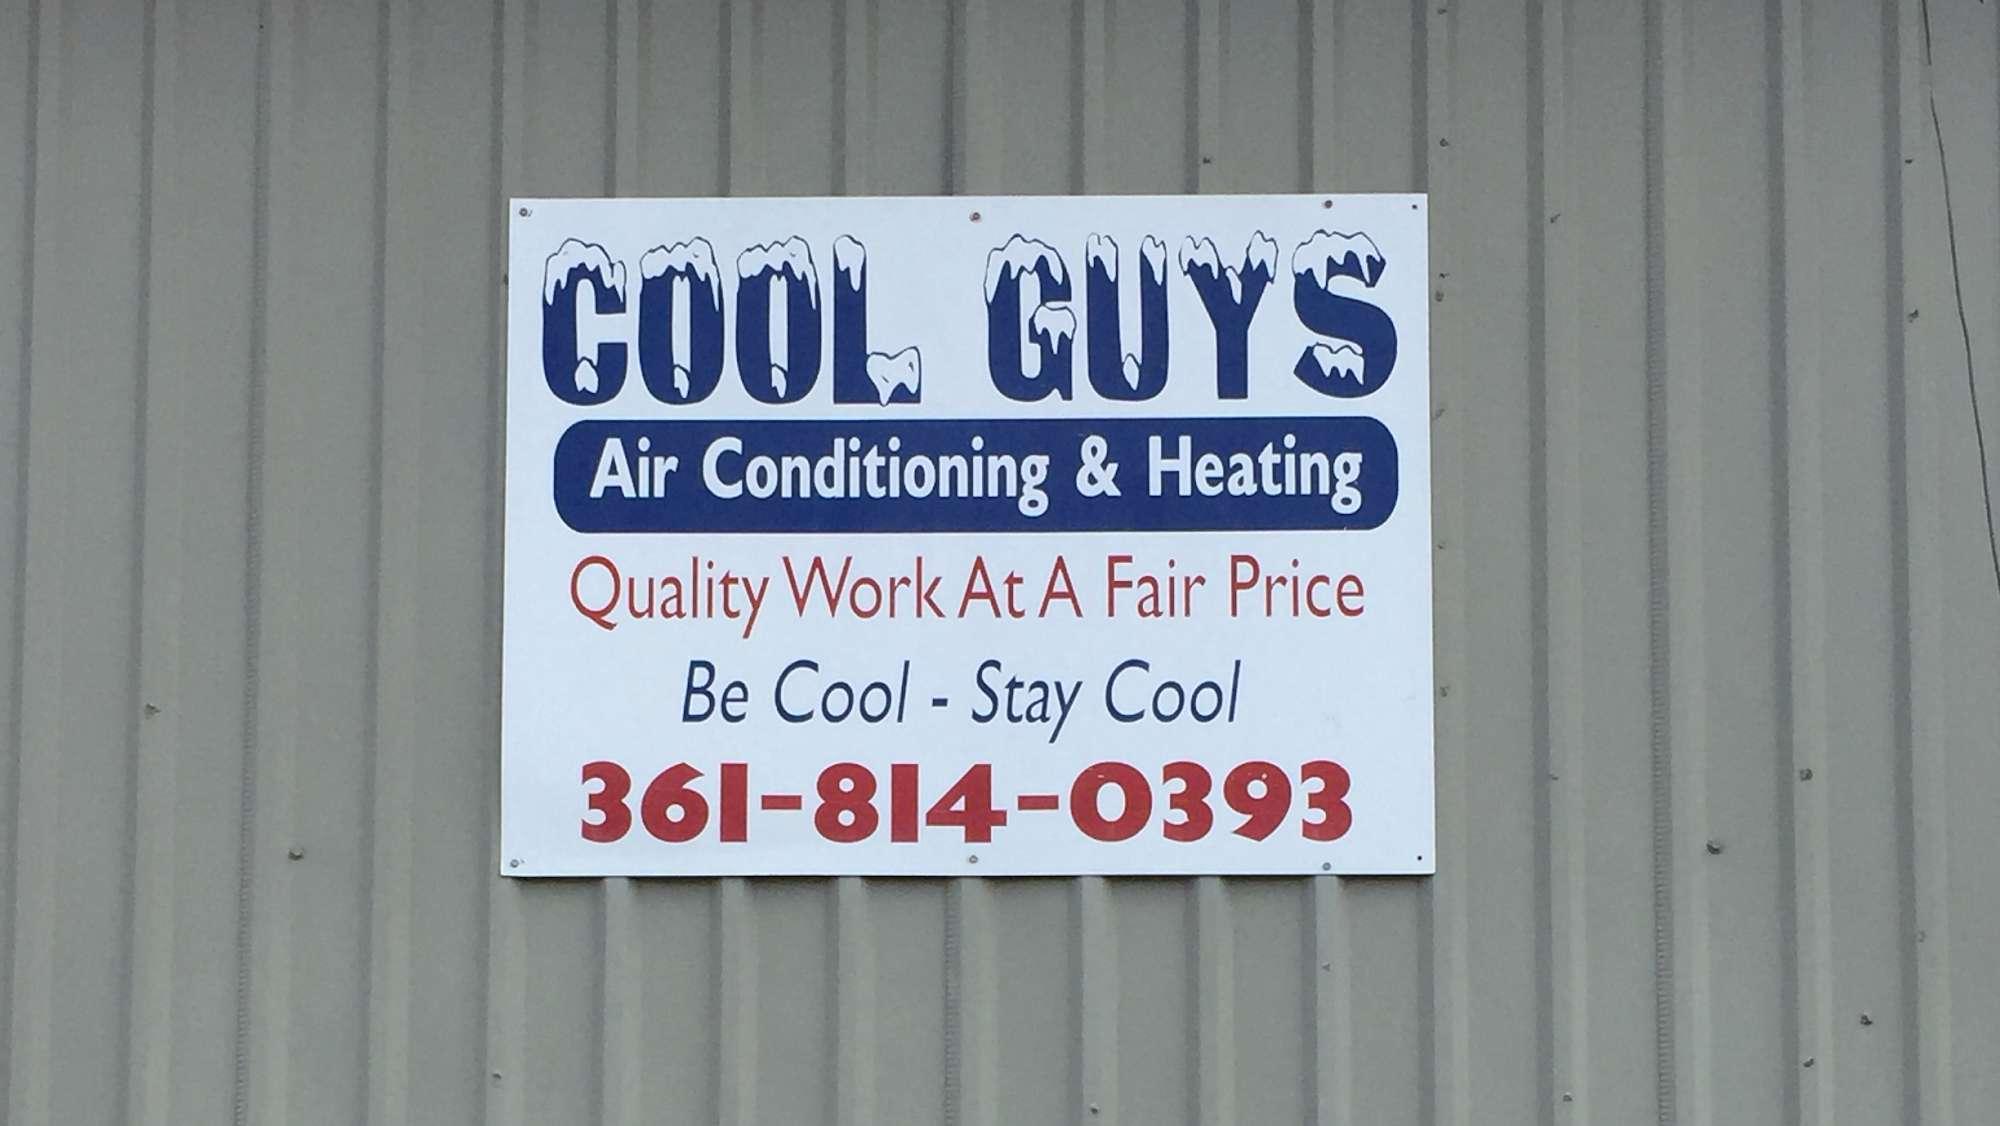 Cool Guys Air Conditioning & Heating